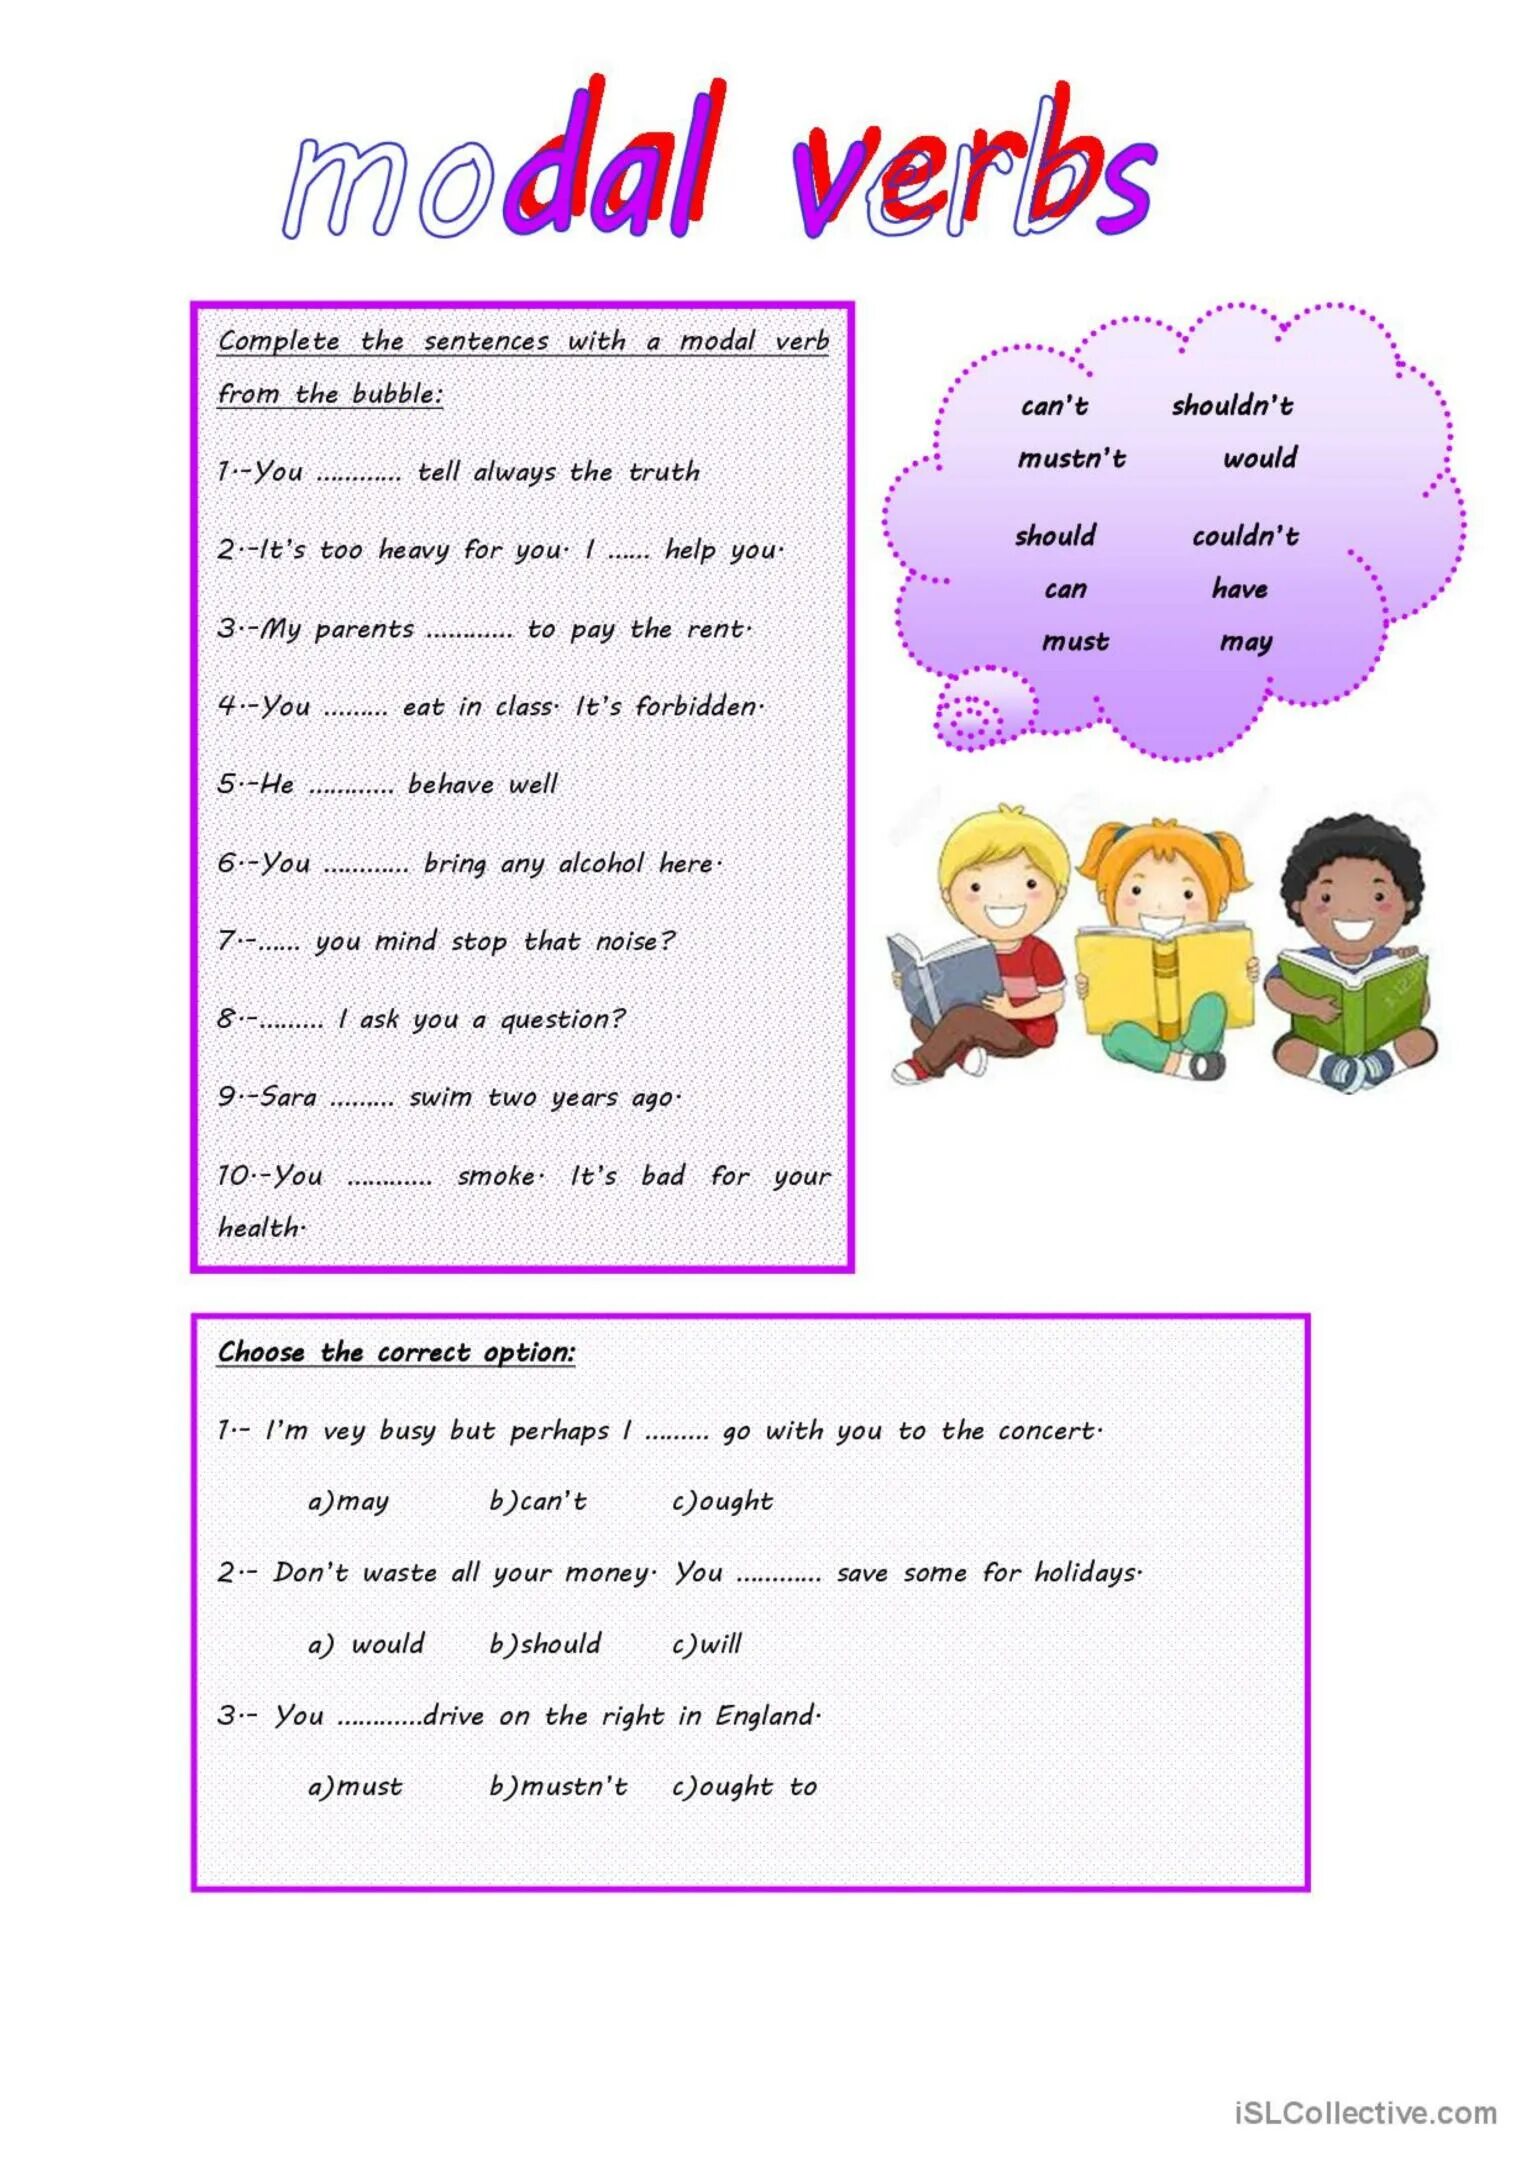 Modal verbs in English Grammar exercises. Modal verbs exercises 5 класс. Exercises with modal verbs. Модальные глаголы can could Worksheets. Have to has to should exercises